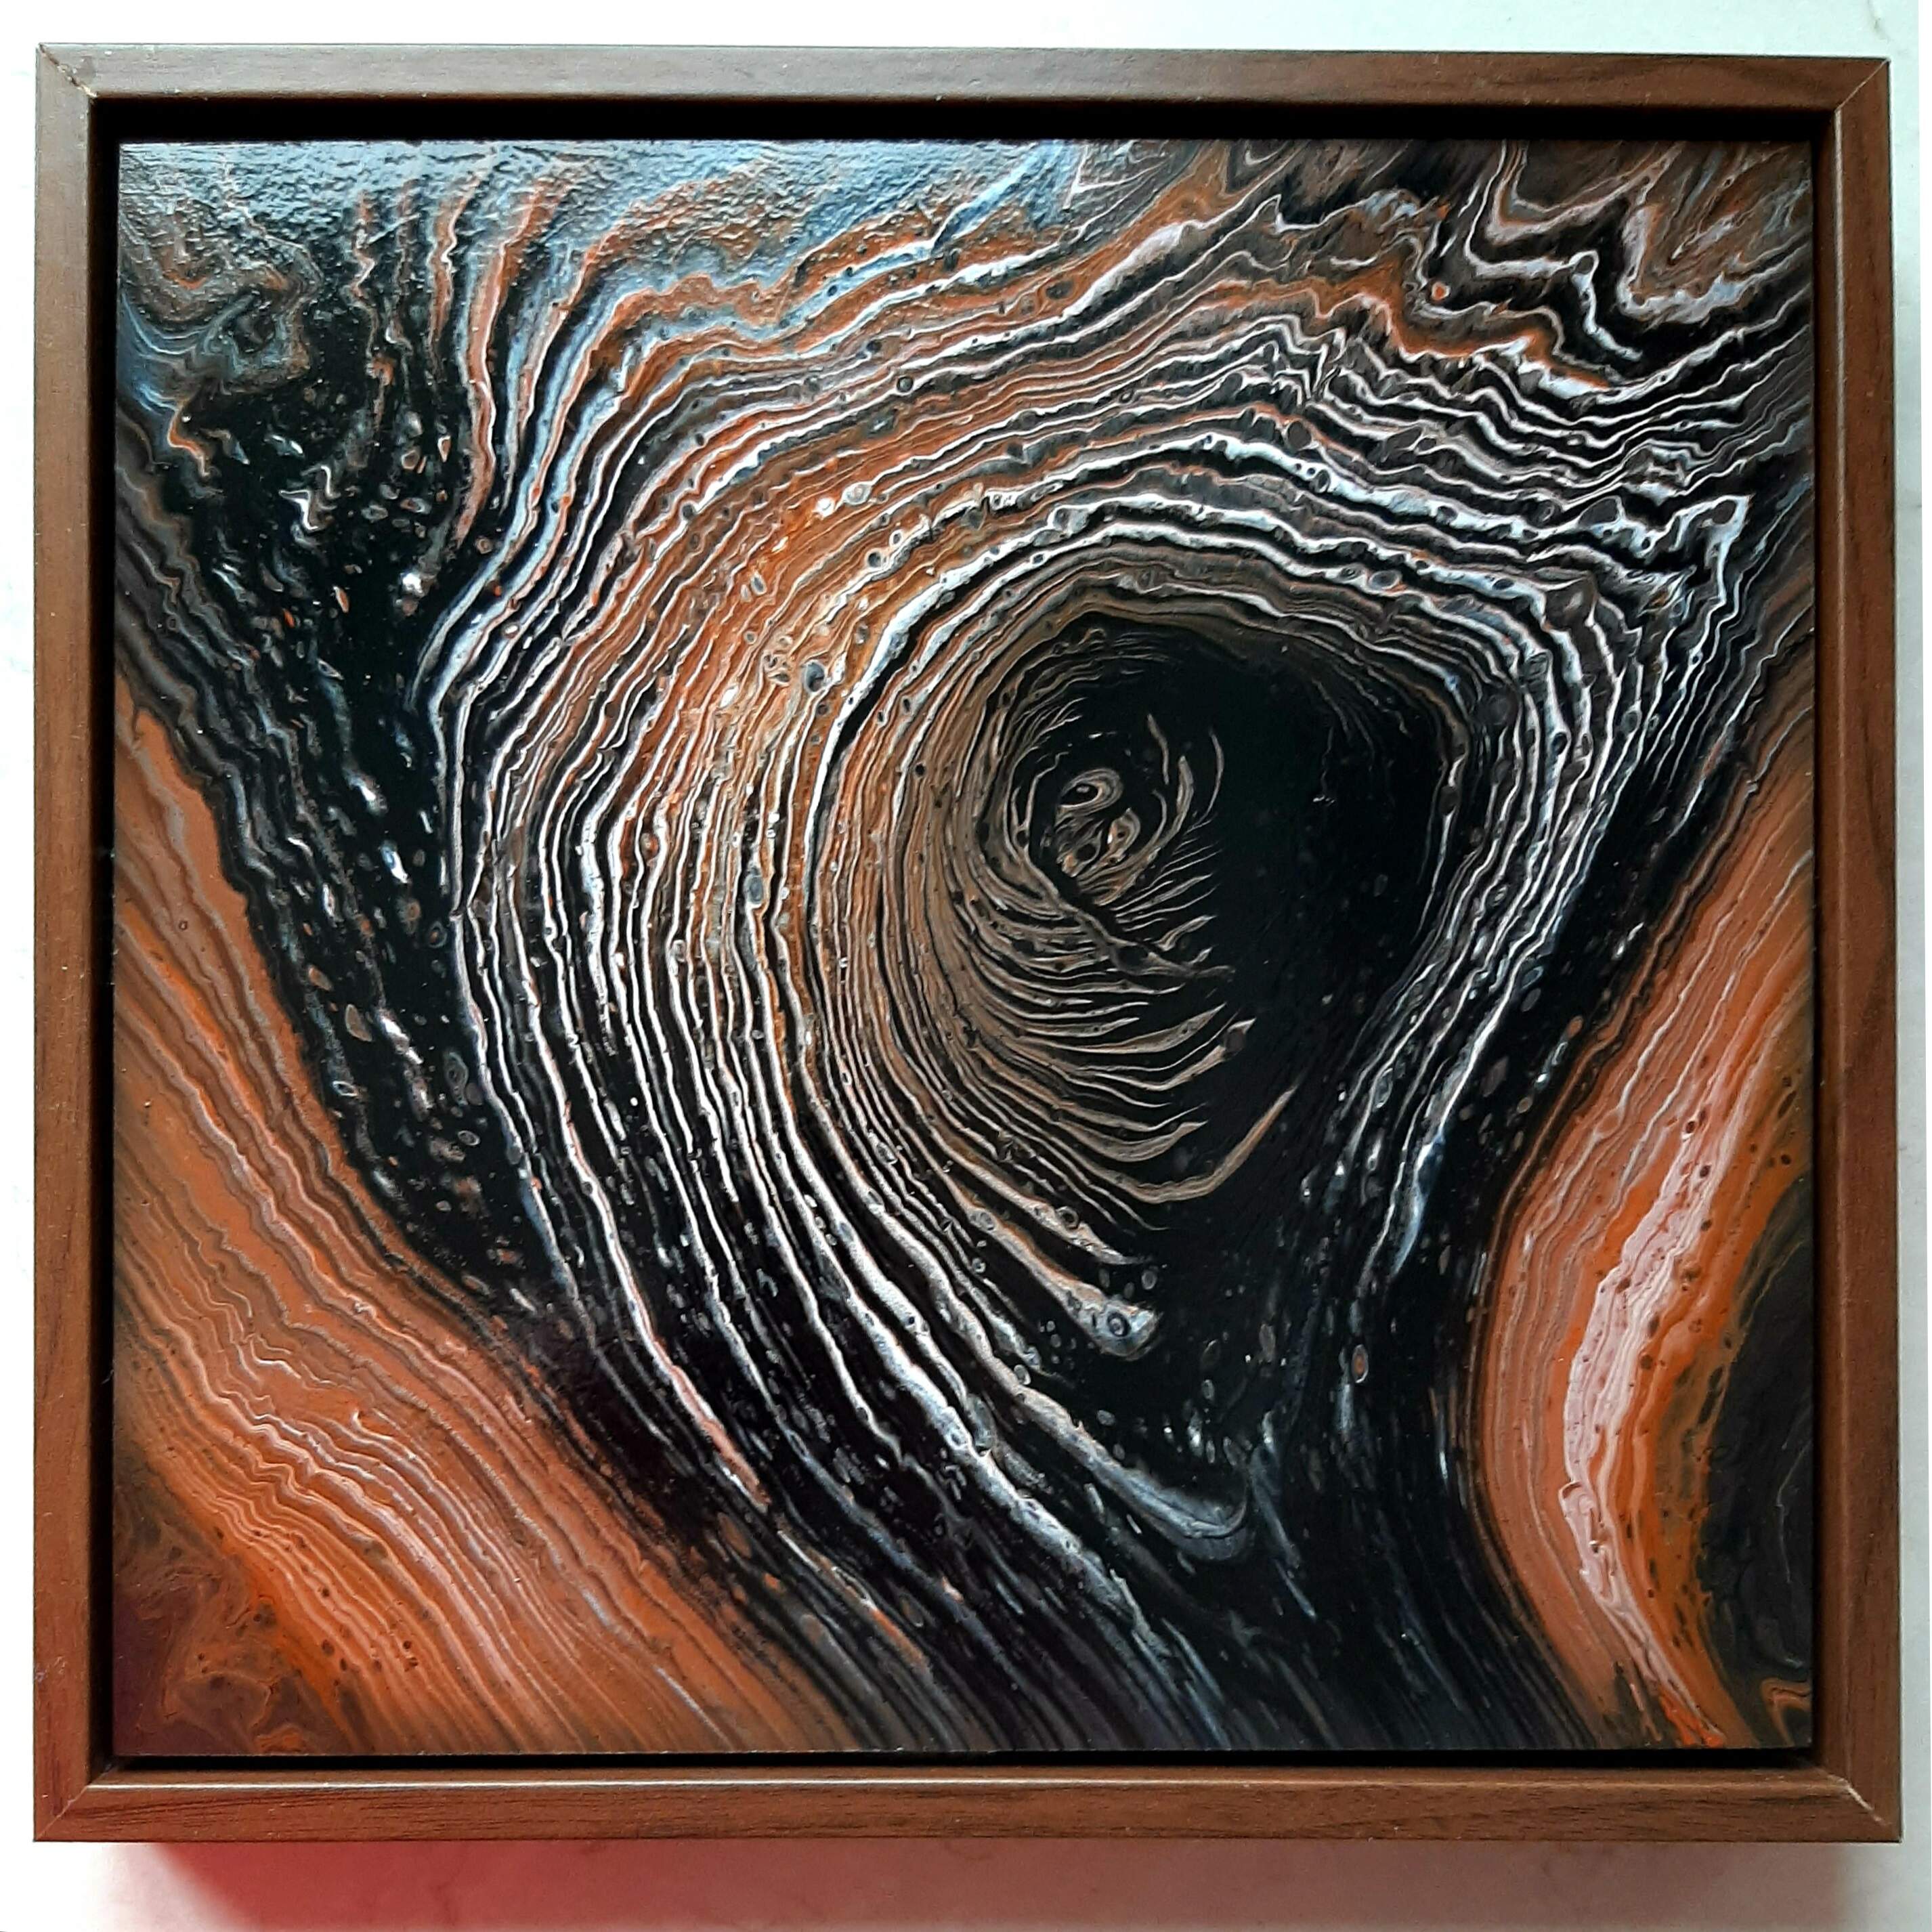 Fluid art ring pour on wooden panel with wooden box frame